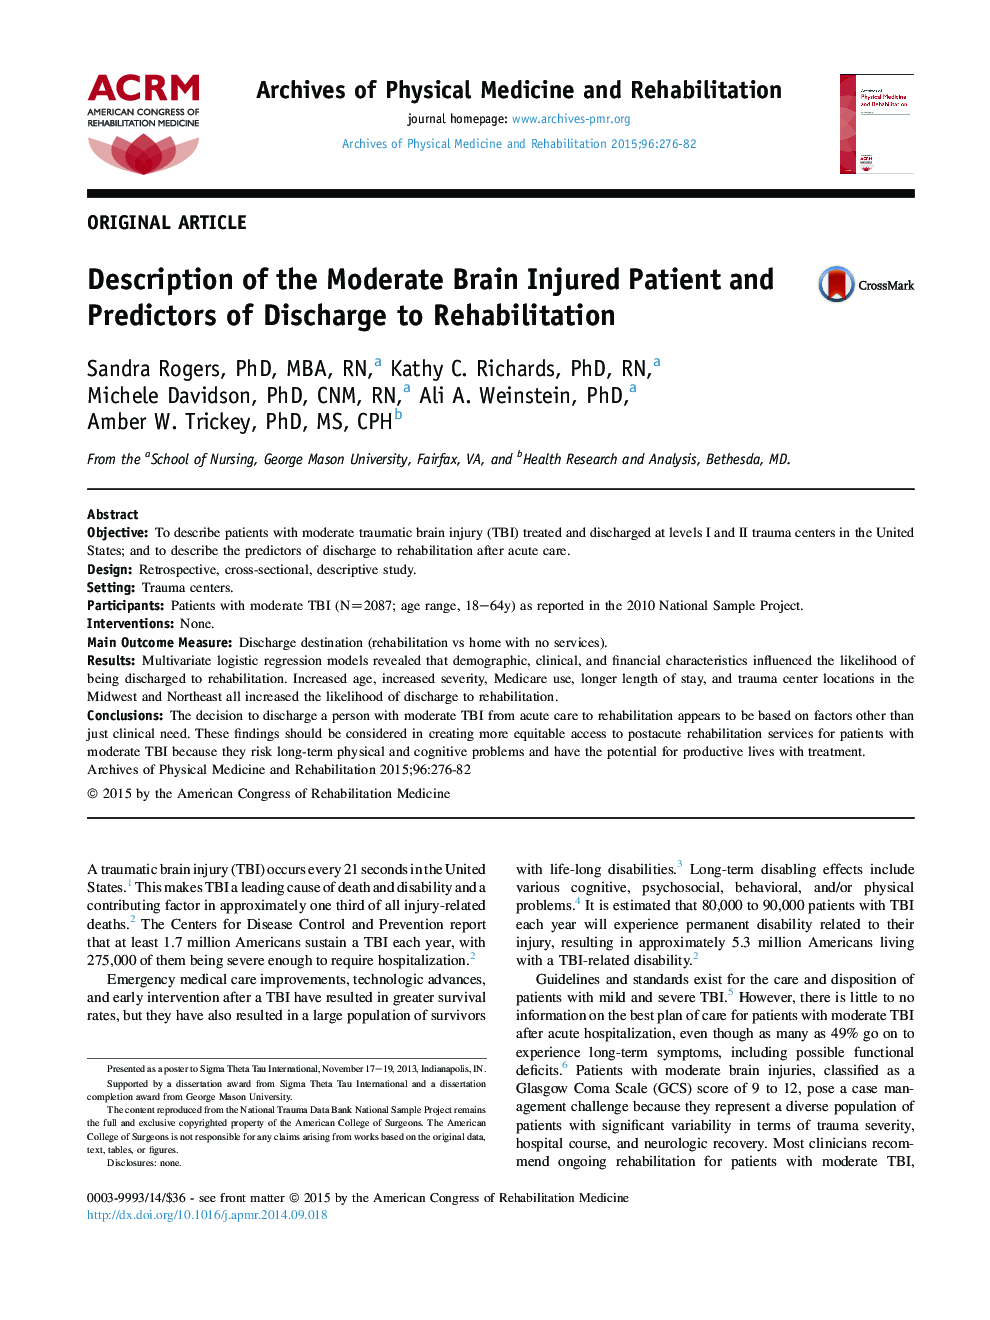 Description of the Moderate Brain Injured Patient and Predictors of Discharge to Rehabilitation